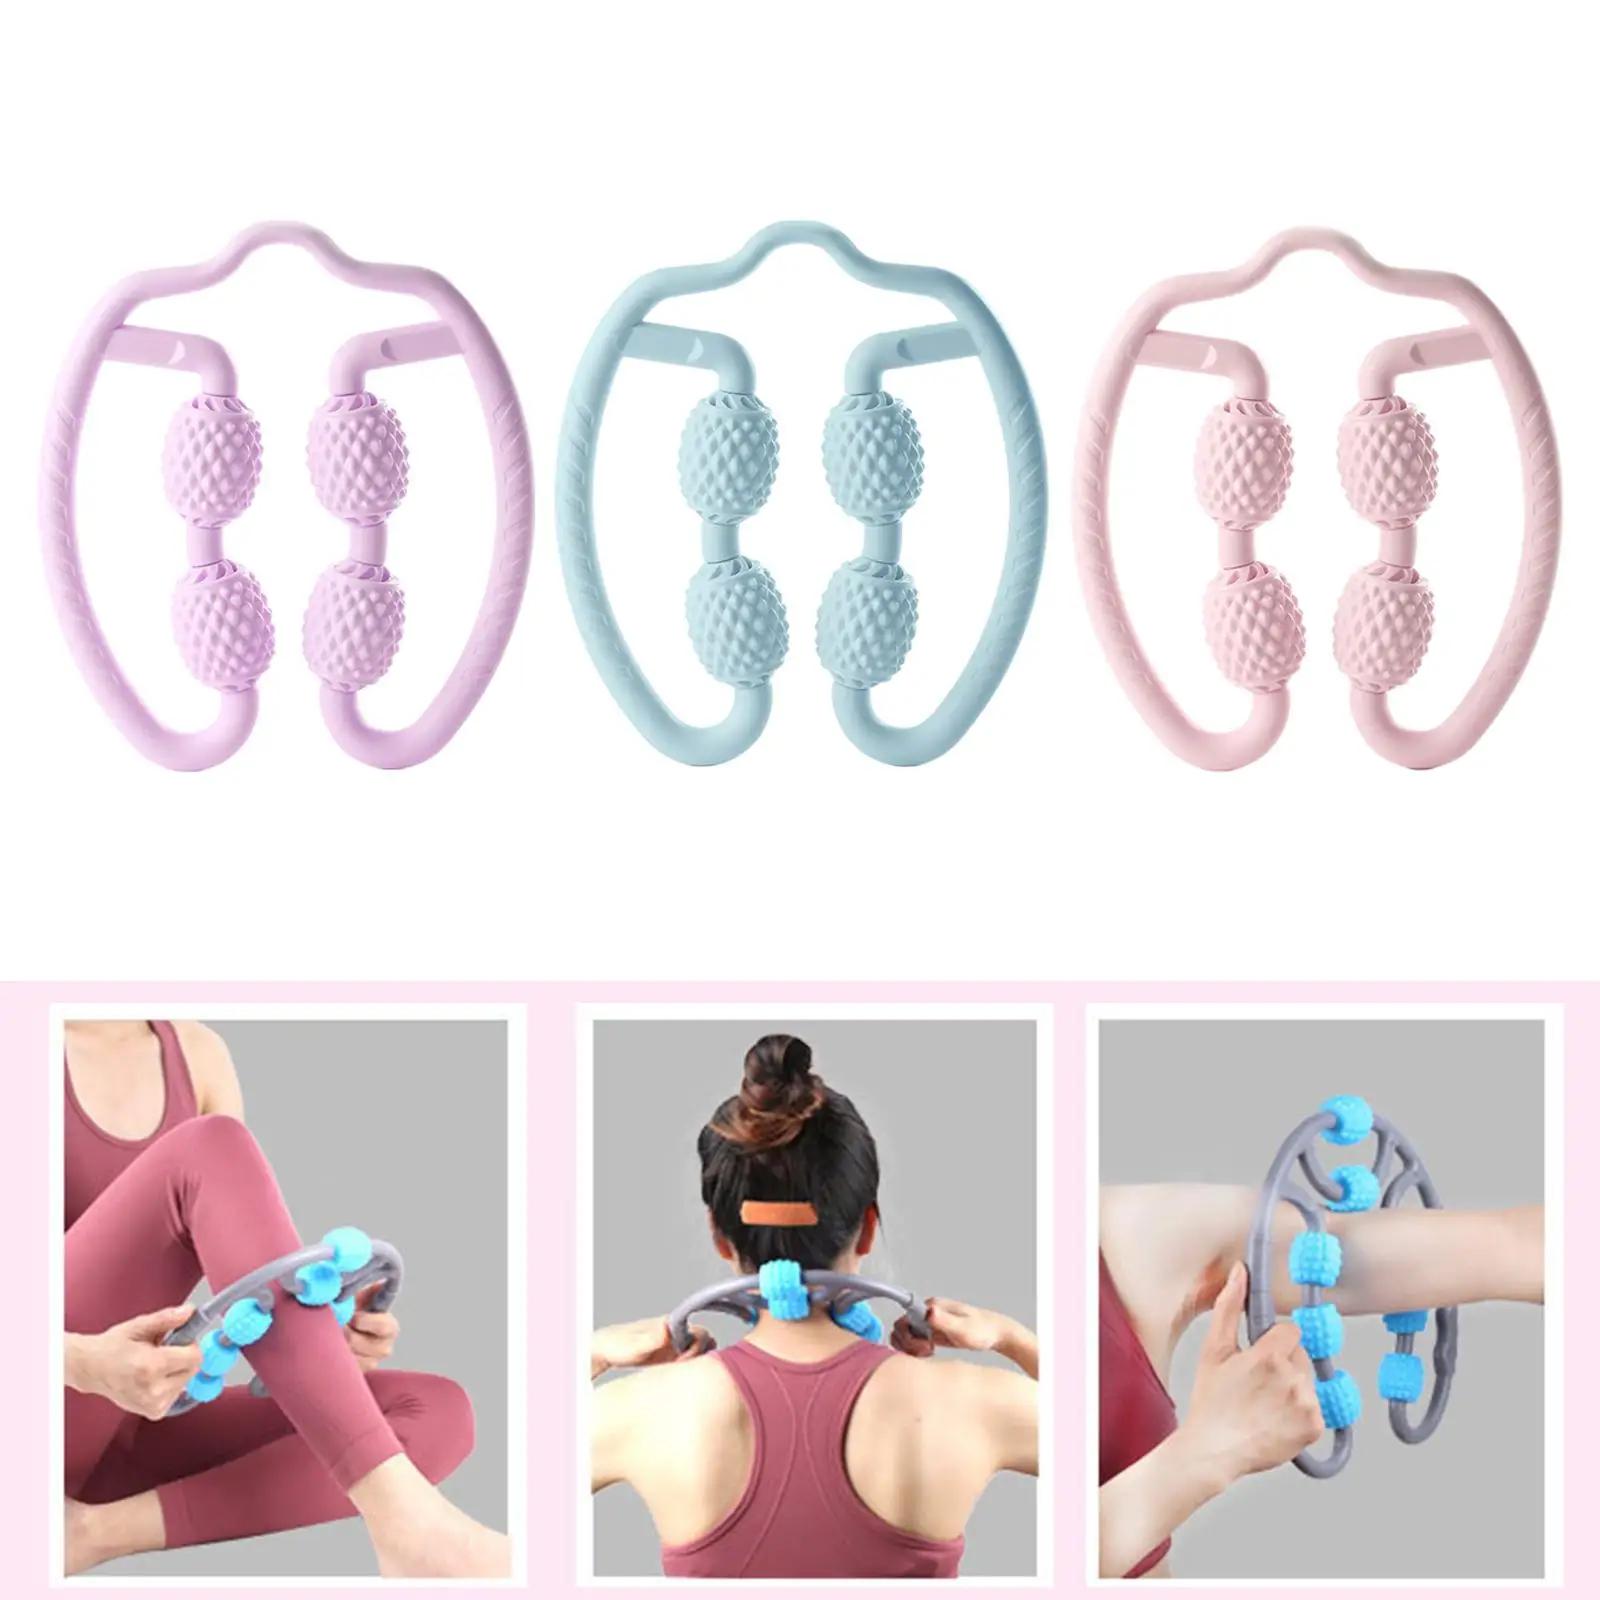 1x Body Roller Massager Lightweight Dual Angle Muscle Roller for Calves Legs Arms, Tennis Elbow Muscle Soreness Stiffness